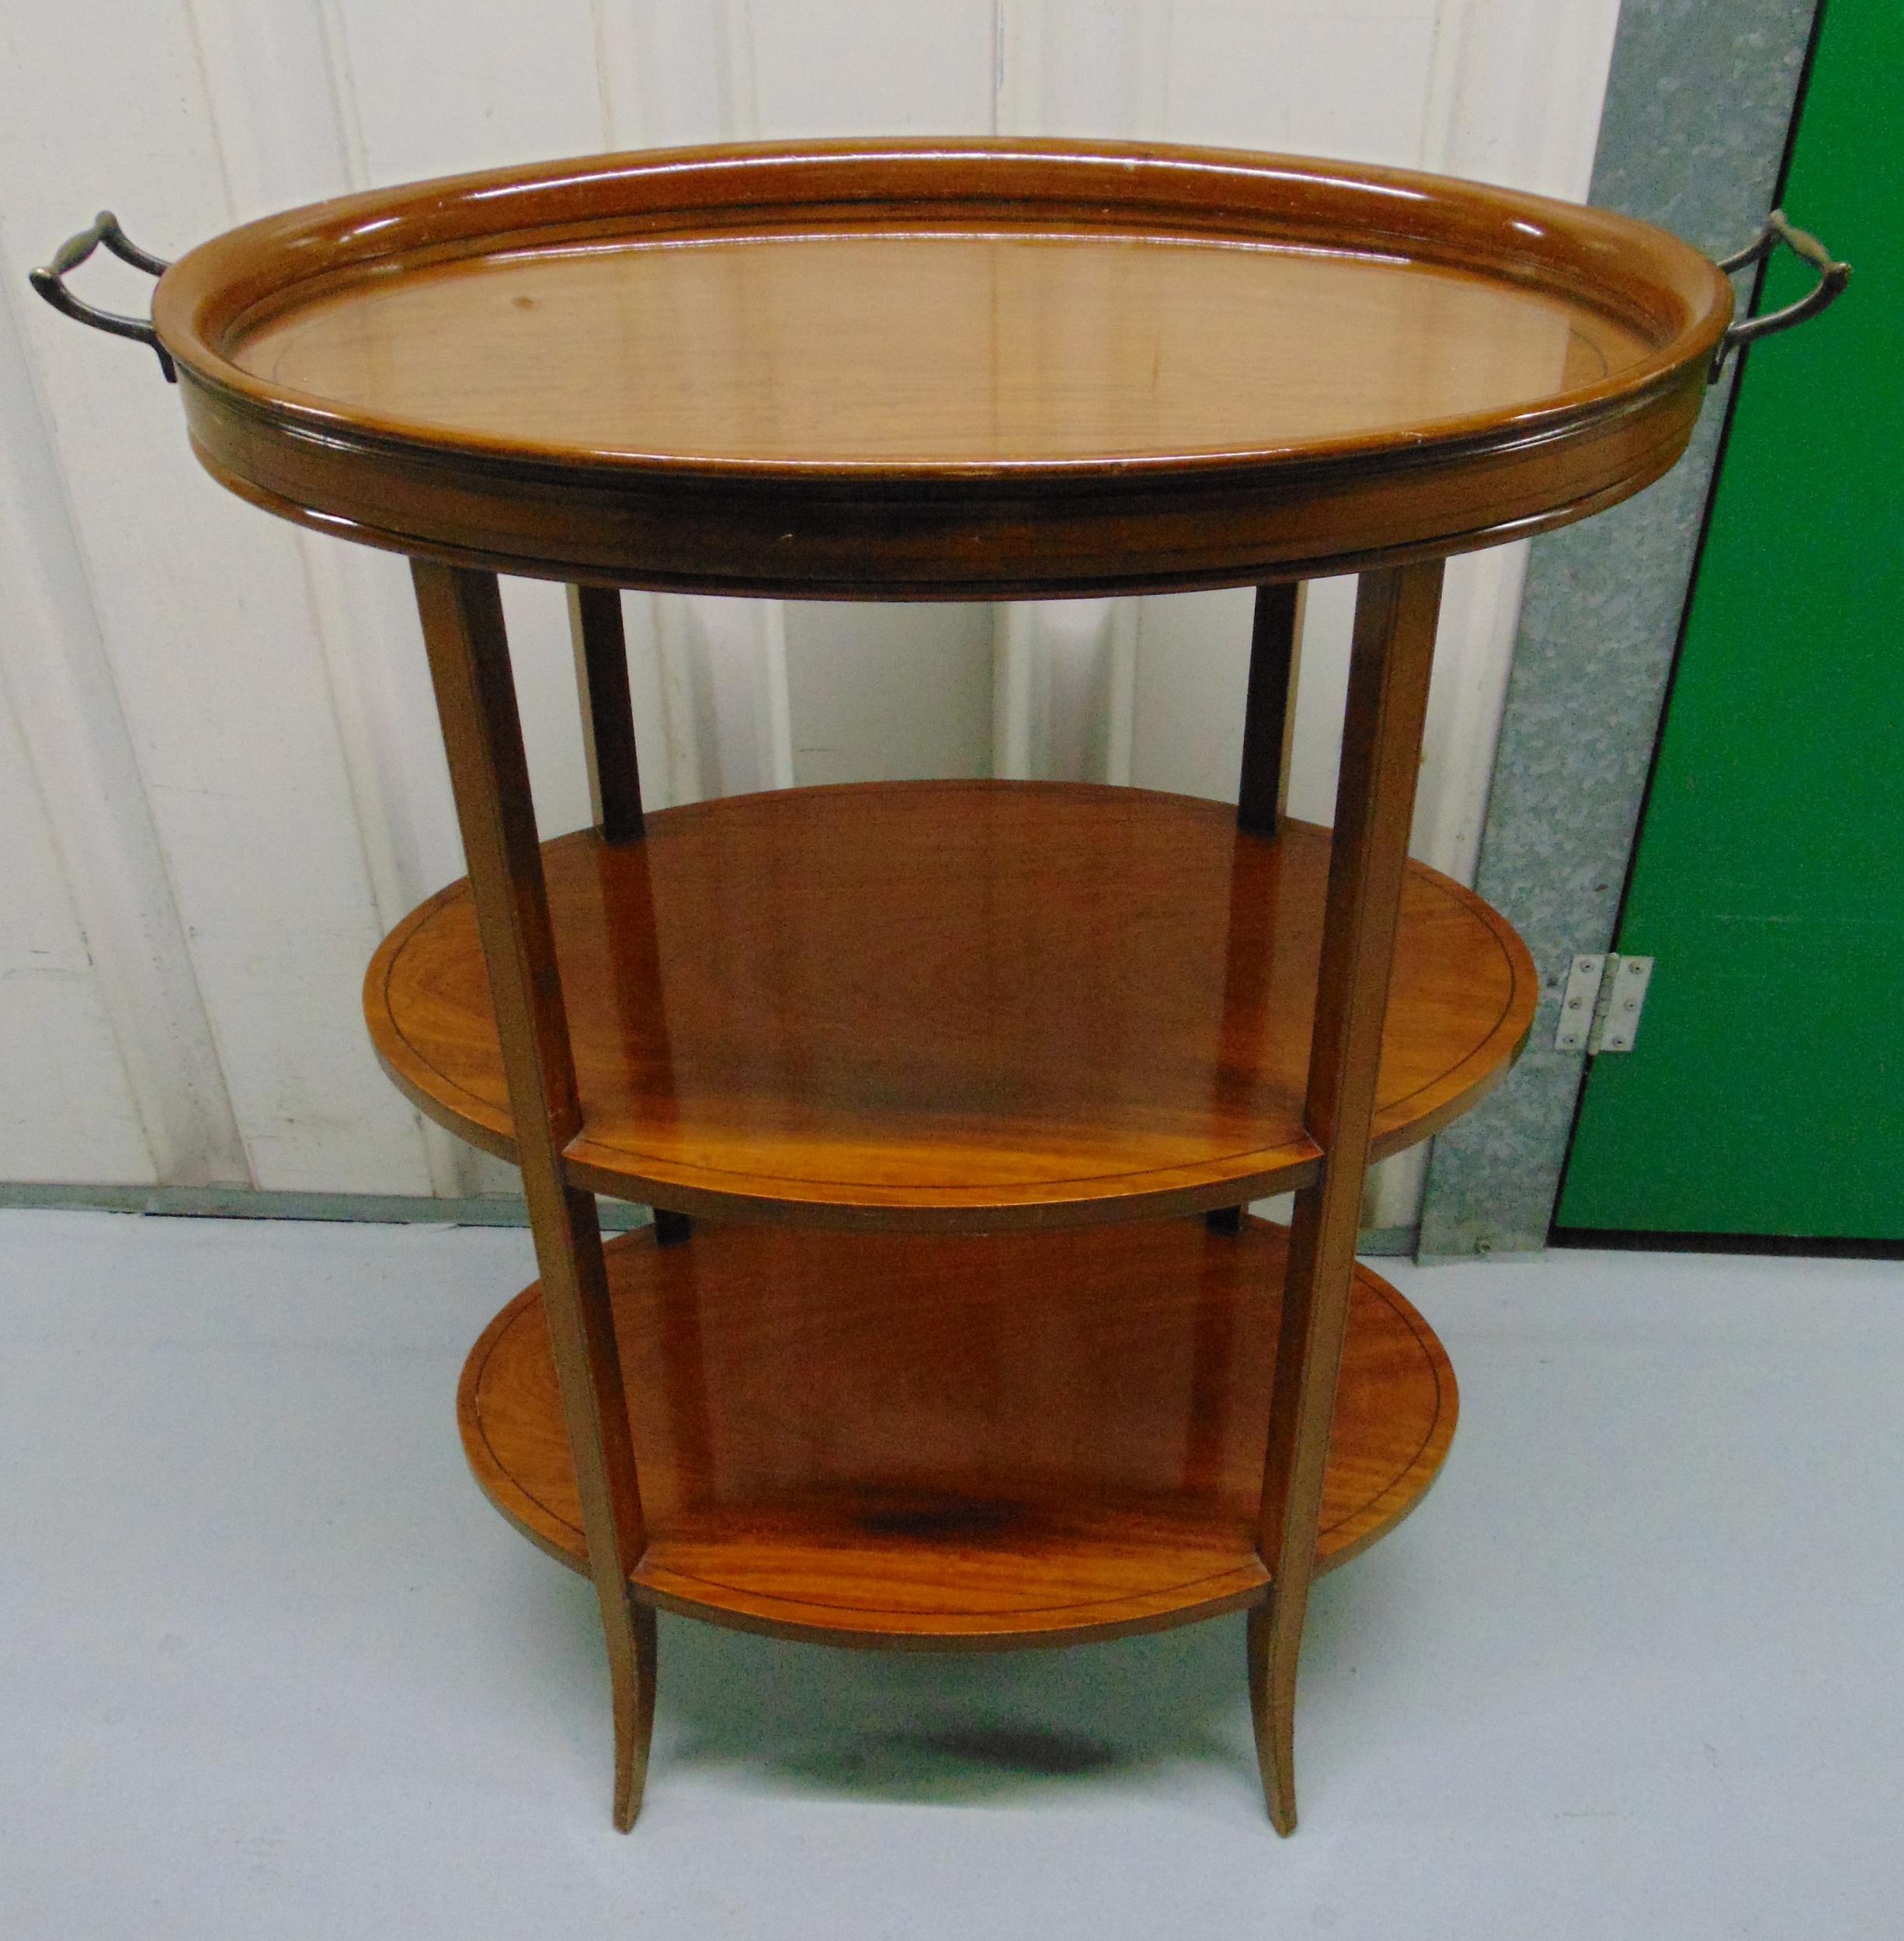 An Edwardian oval tray table on four tapering supports, 80 x 65 x 36cm